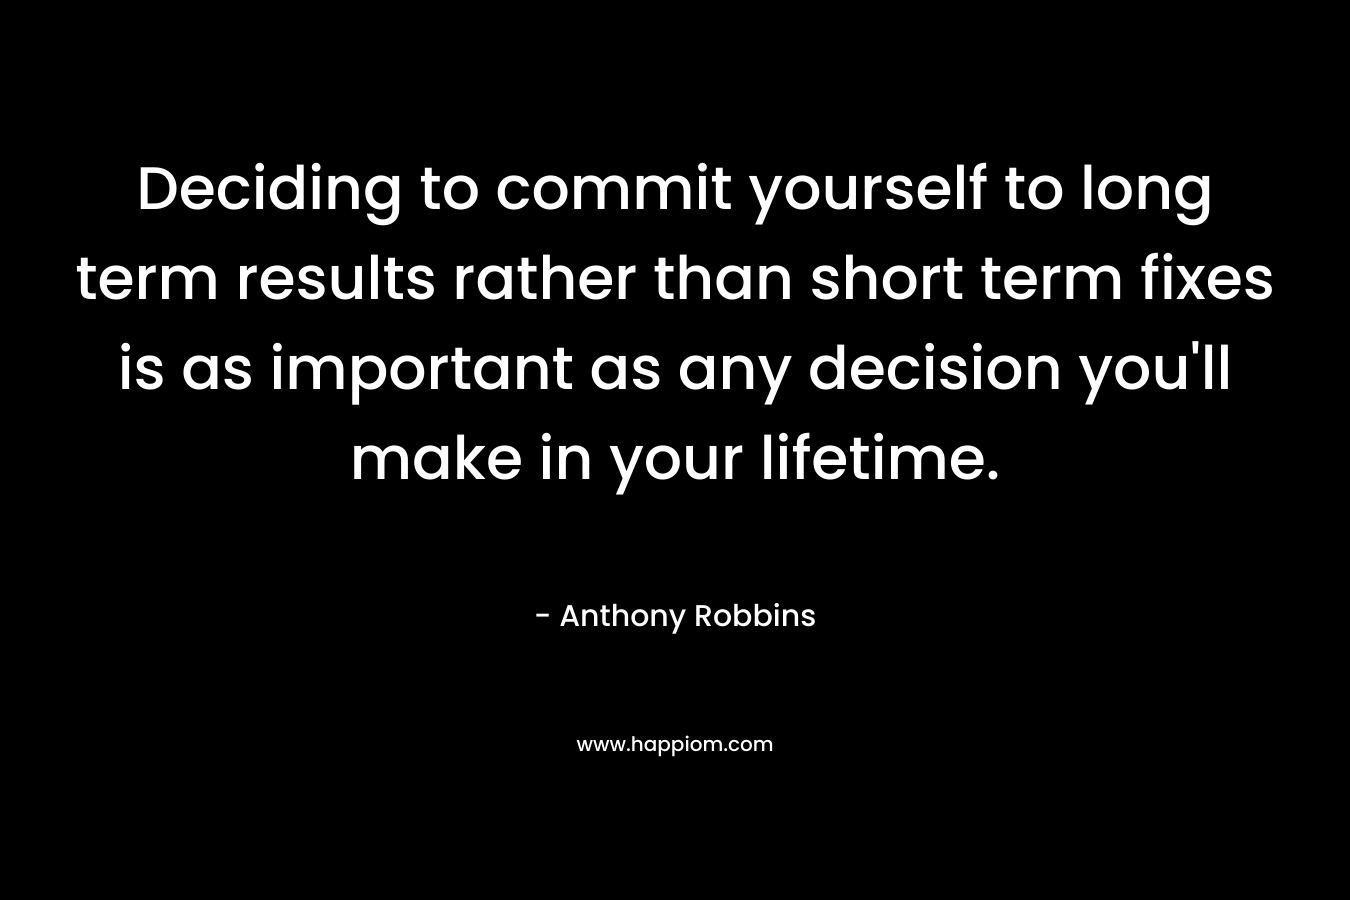 Deciding to commit yourself to long term results rather than short term fixes is as important as any decision you’ll make in your lifetime. – Anthony Robbins